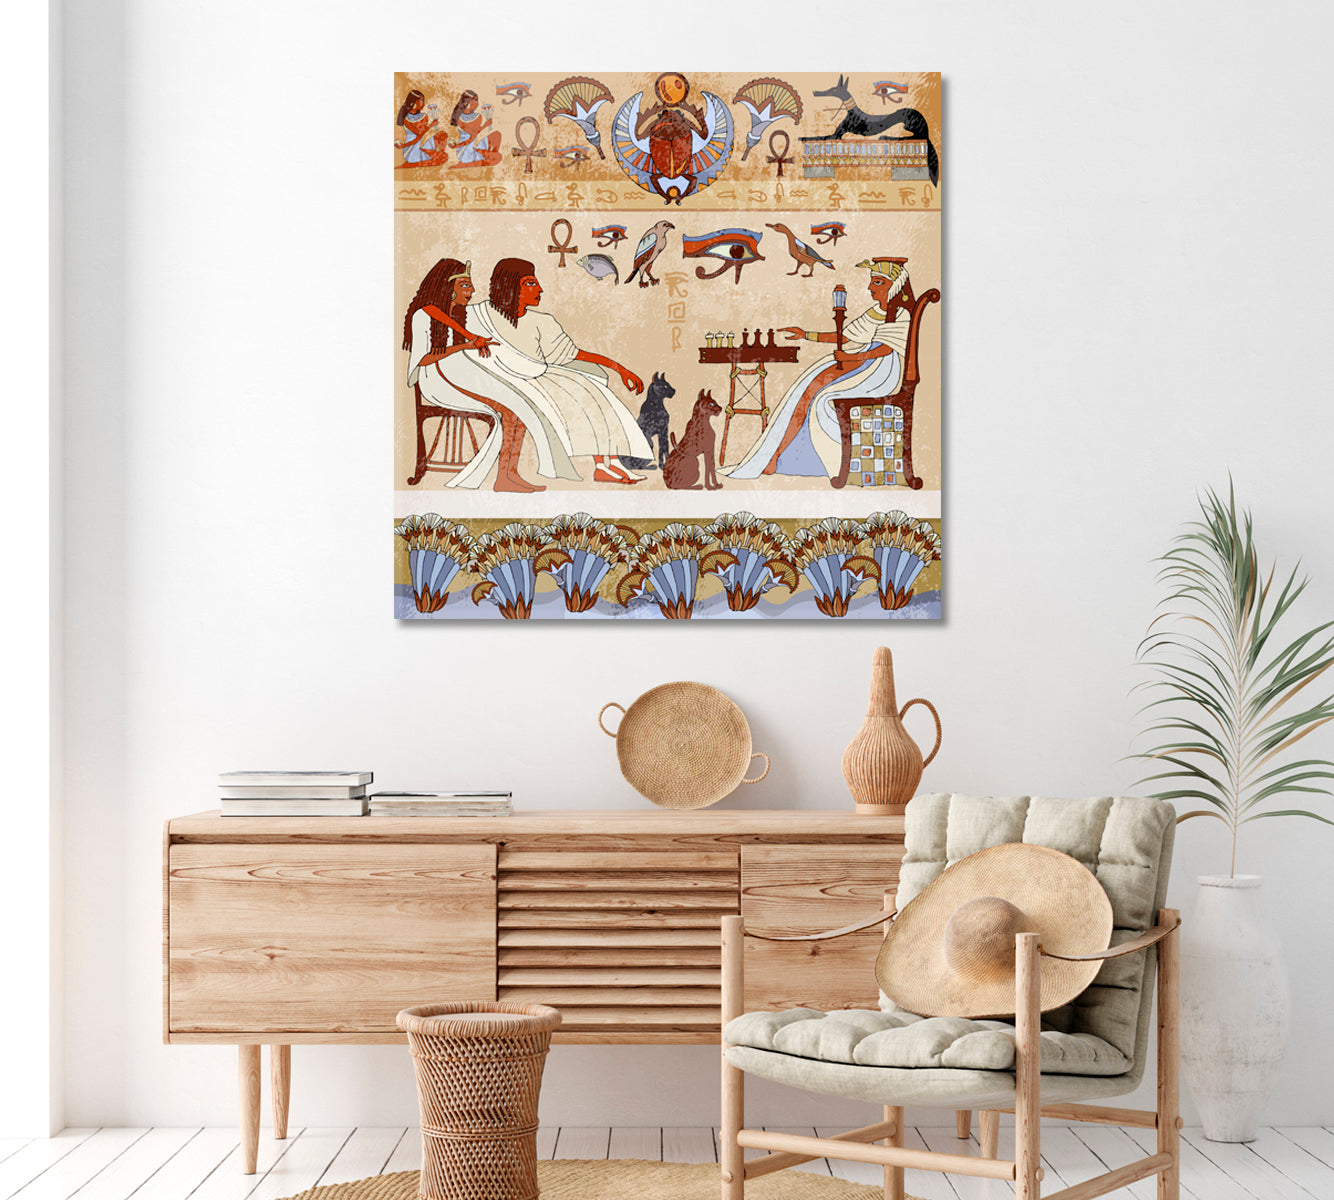 Ancient Egypt Murals Canvas Print ArtLexy 1 Panel 12"x12" inches 